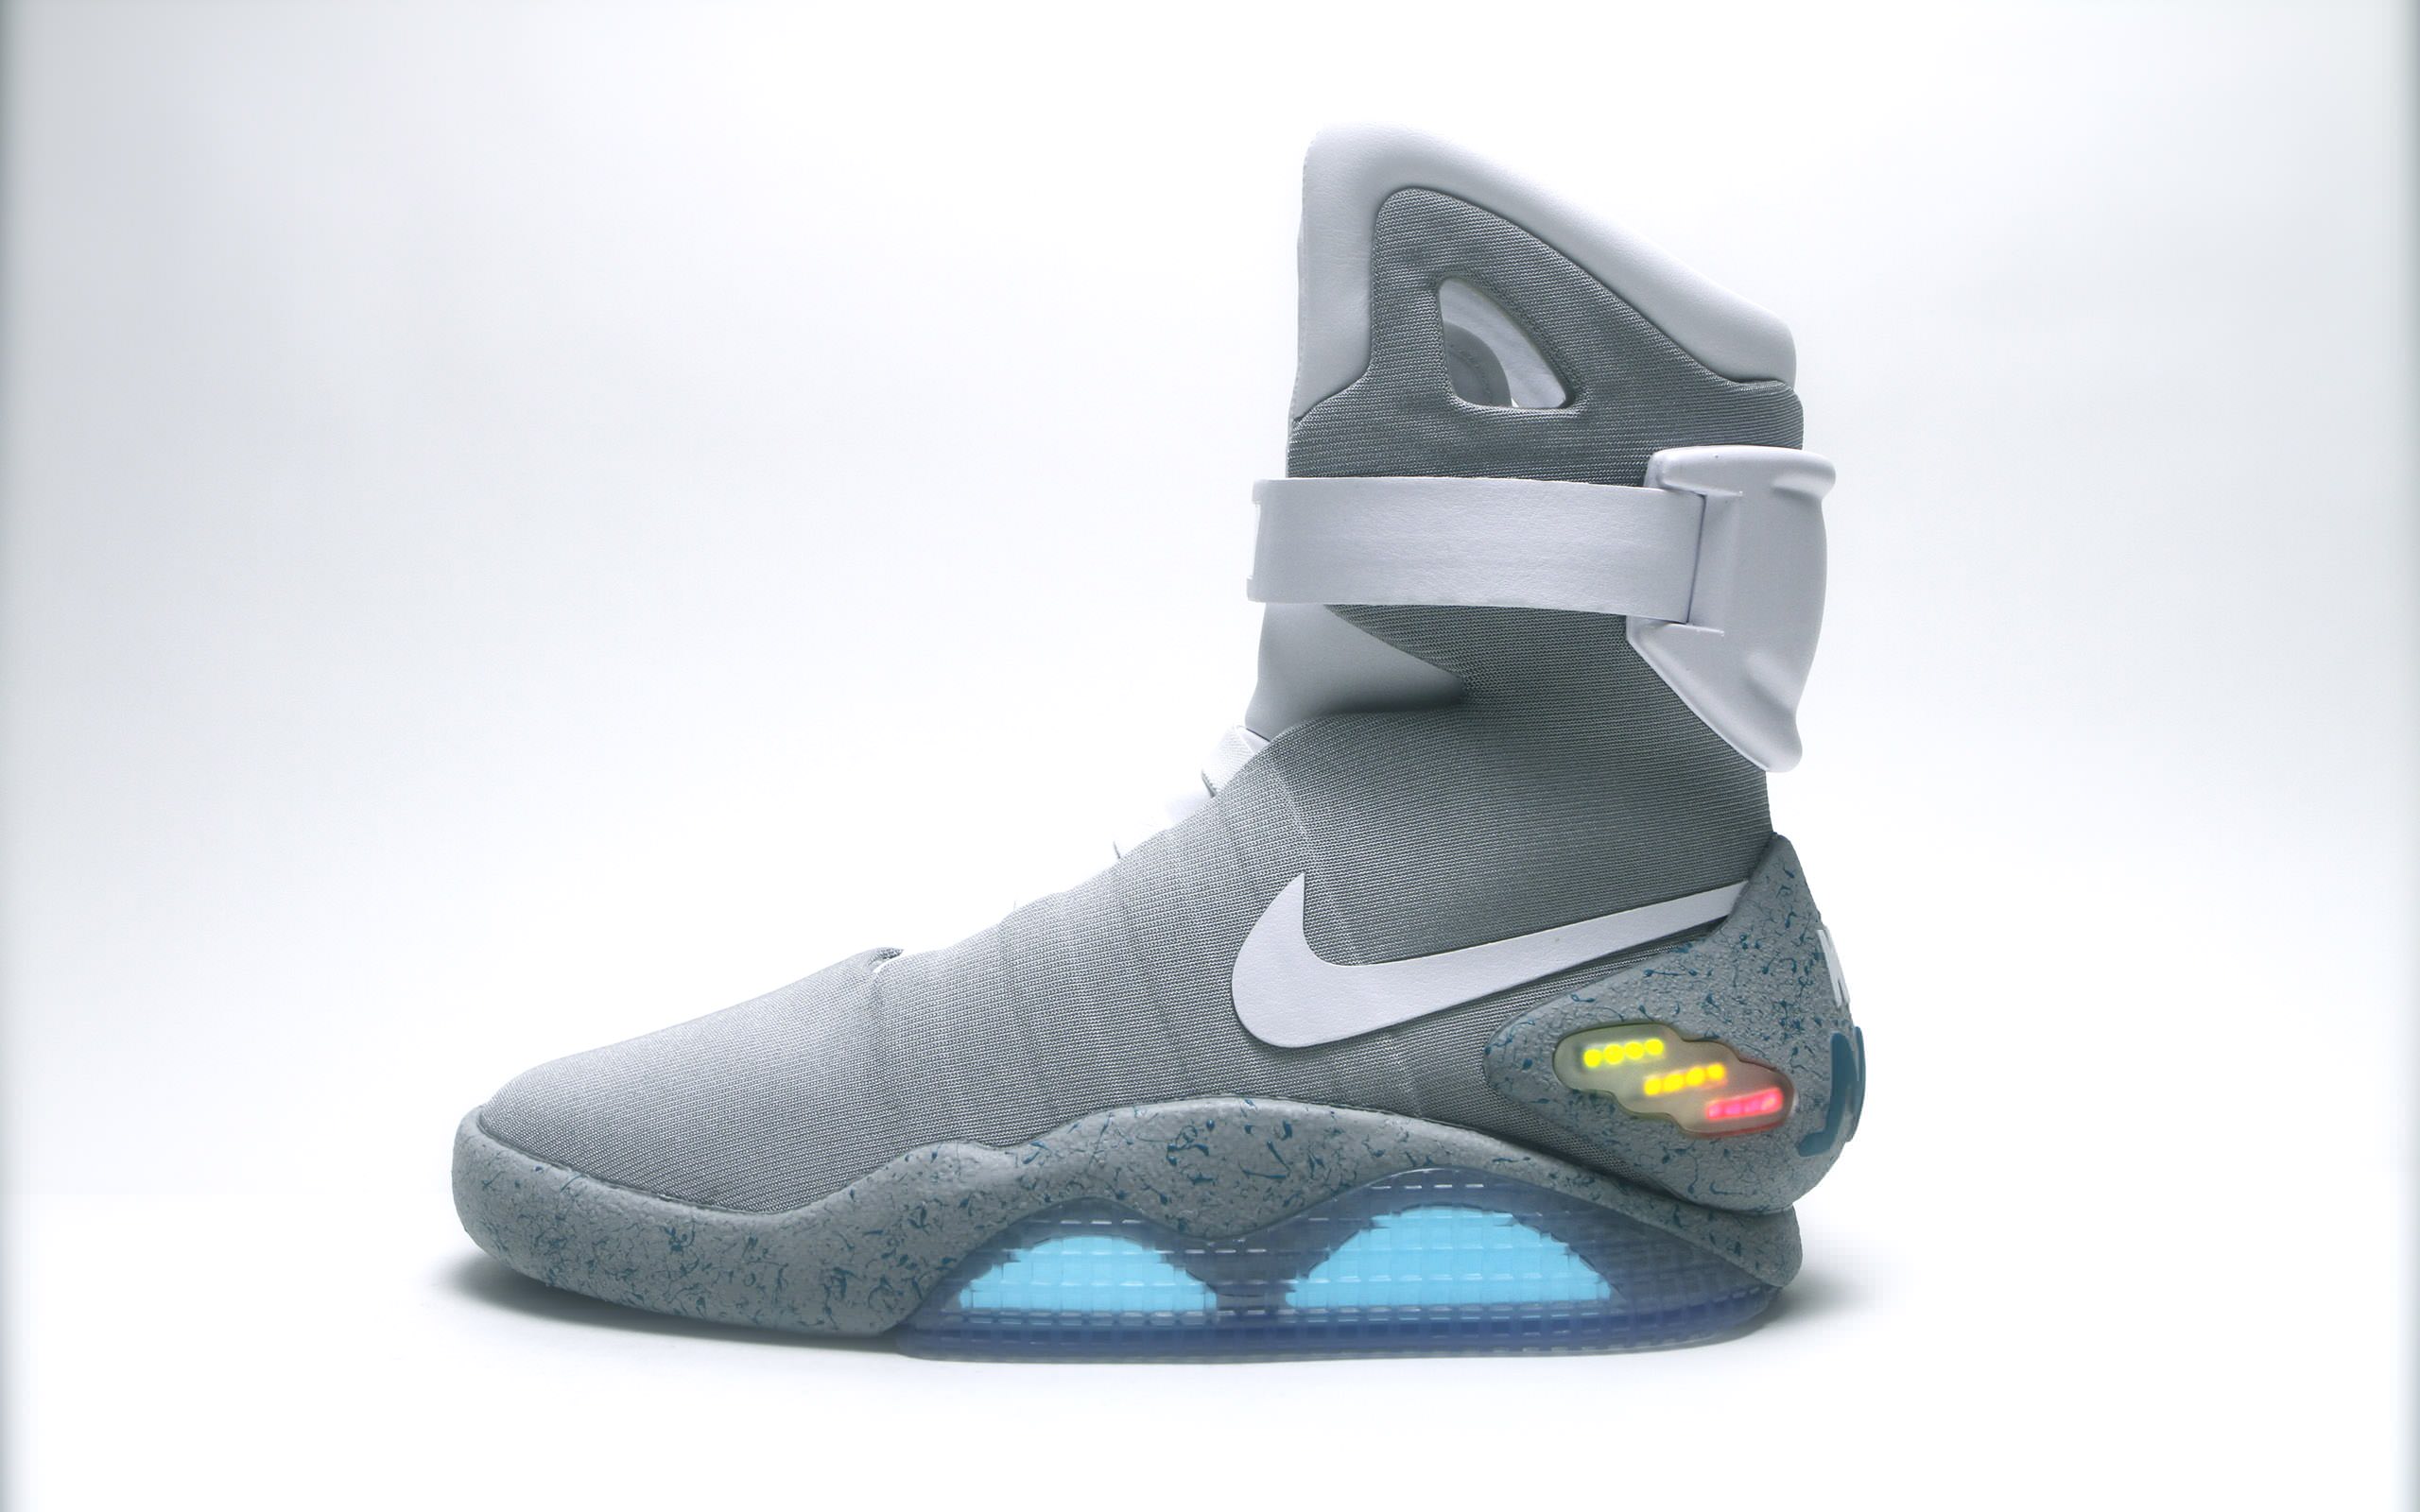 Nike May Have Hinted at a Nike Mag Release Soon